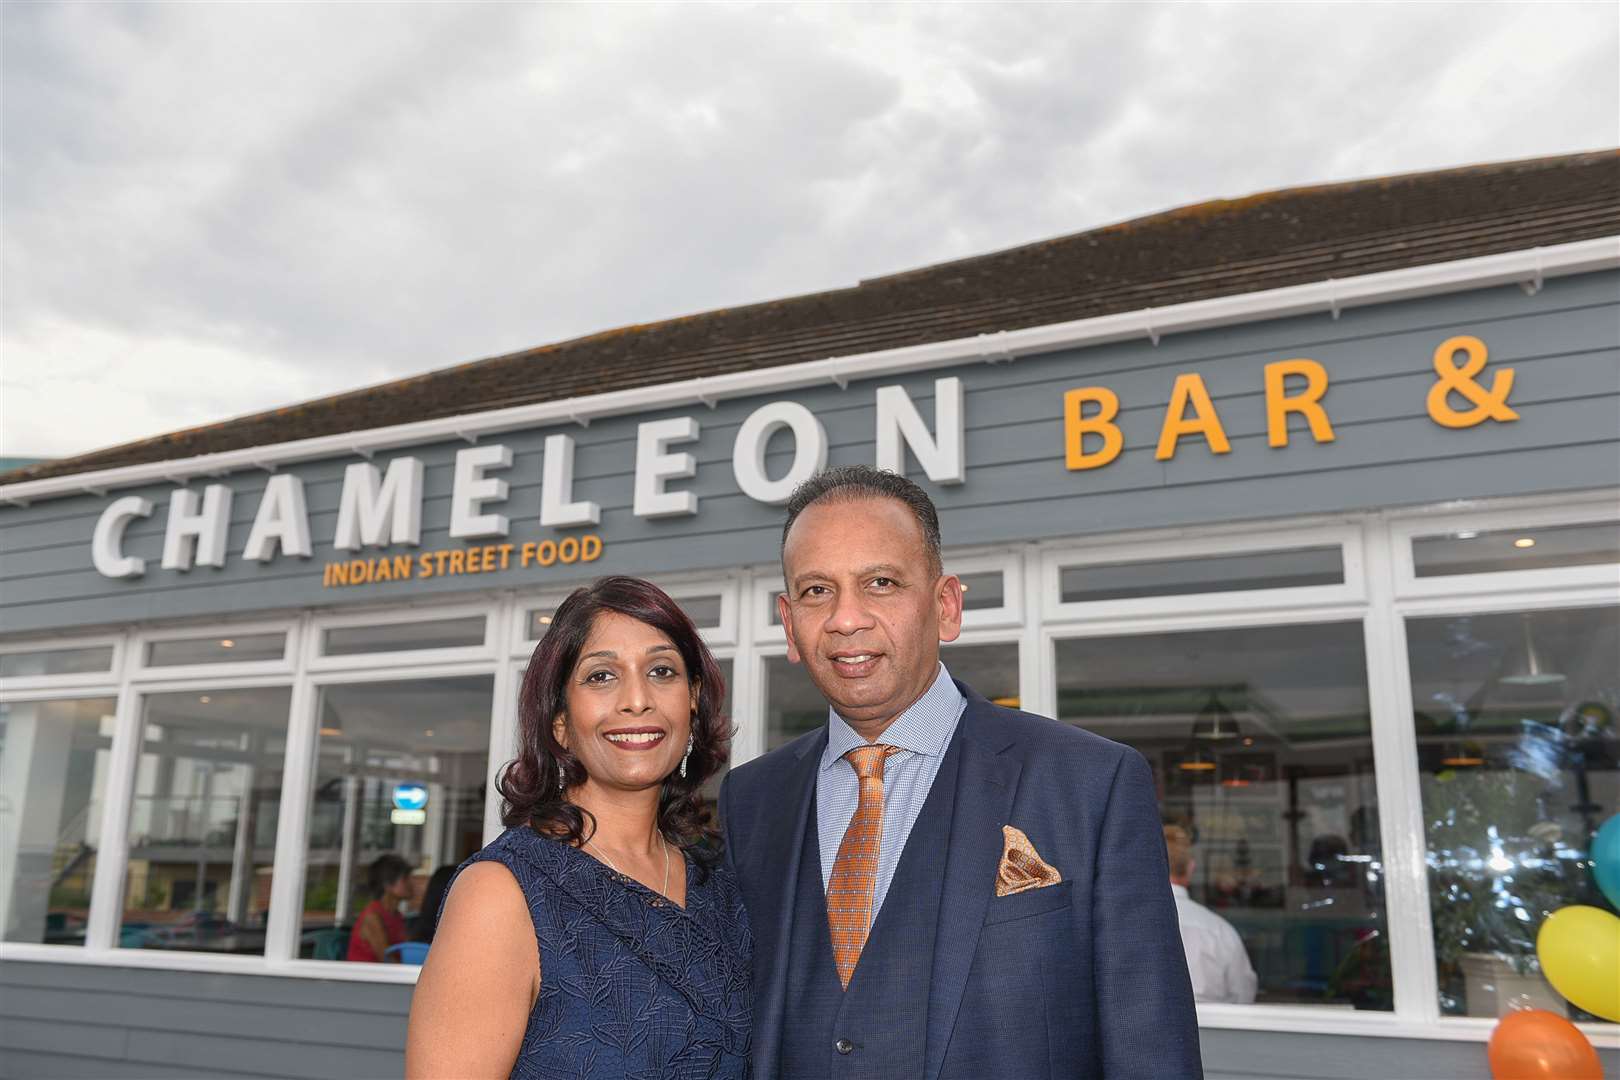 Mr Rajamenon has opened the Chameleon Bar & Grill in Hythe, pictured with wife Anusha